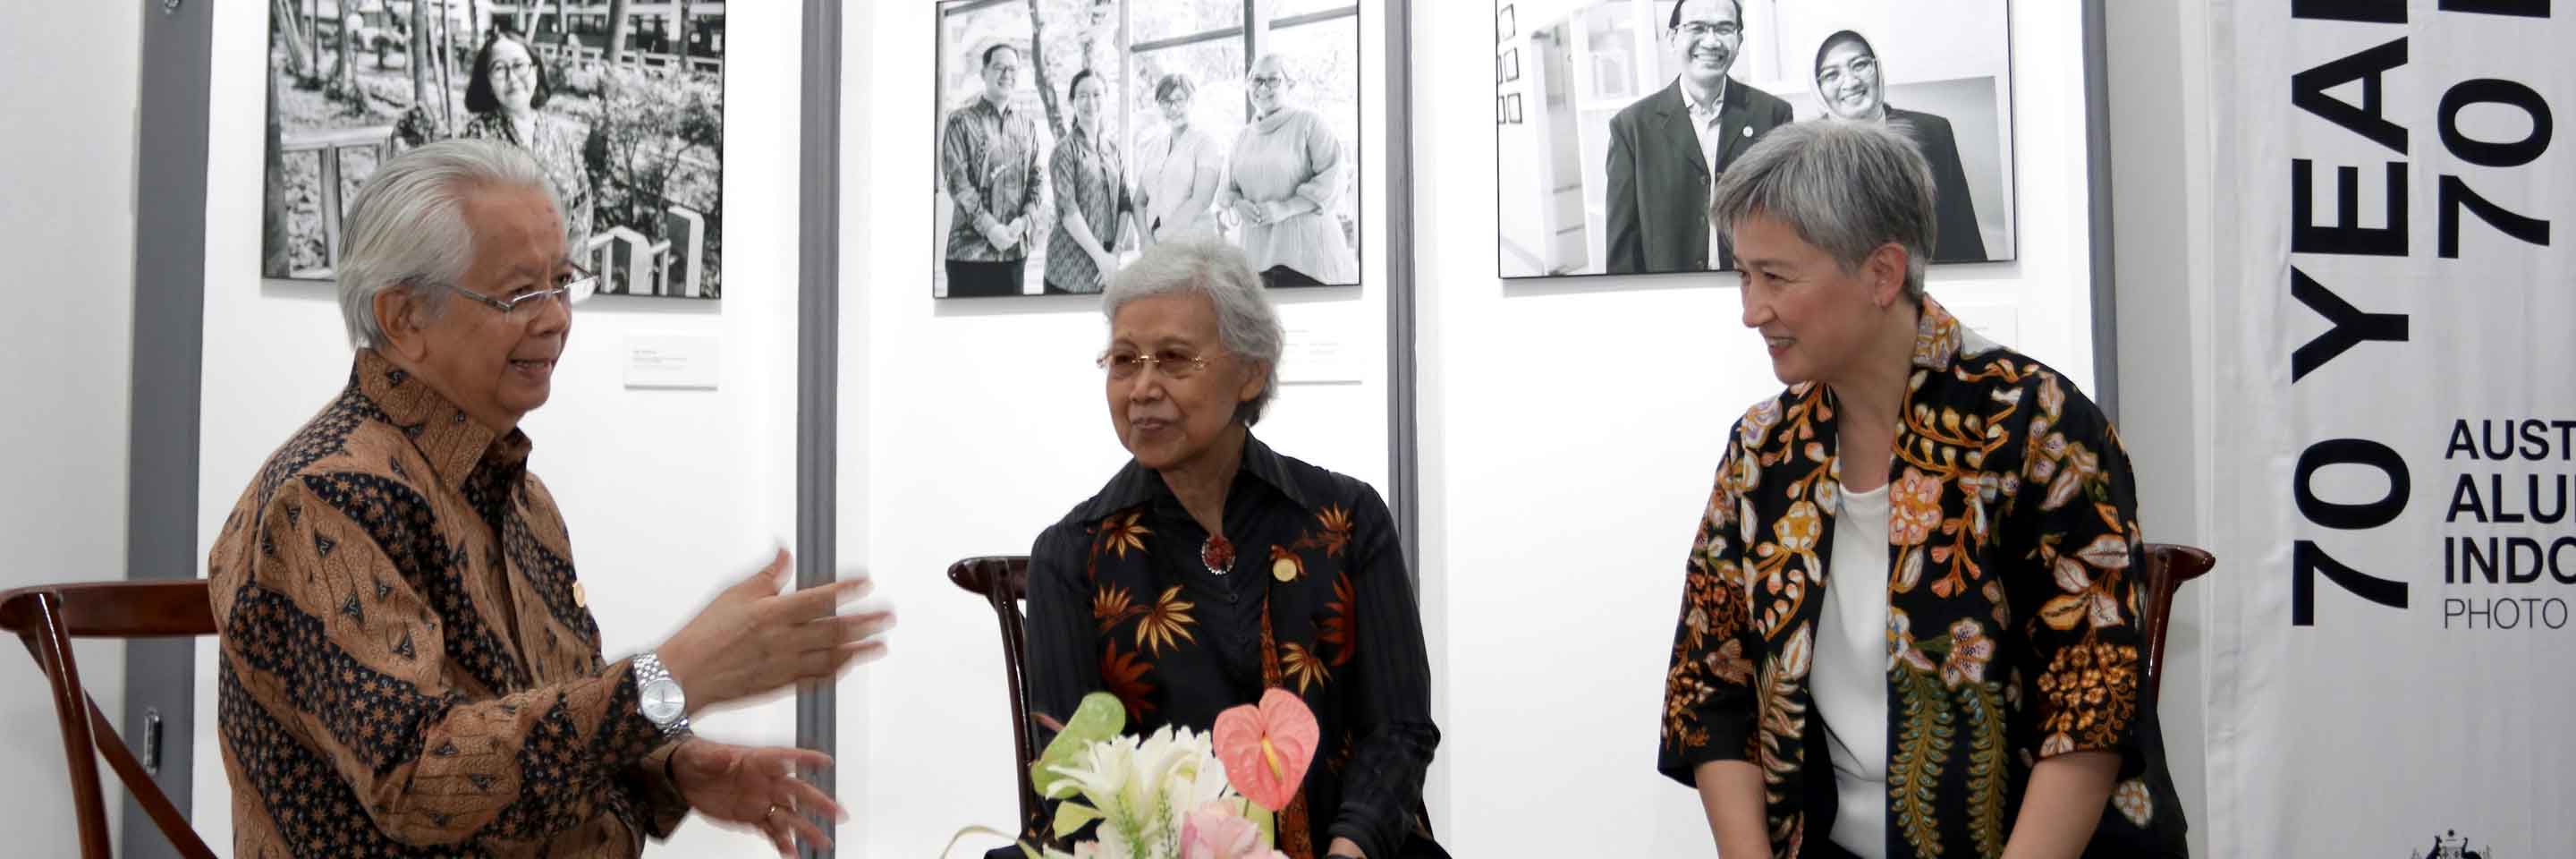 During the inauguration of the "70 Years, 70 Faces: Australian Alumni in Indonesia" Photo Exhibition, the Australian Minister for Foreign Affairs engages in a delightful conversation with two original Colombo Plan scholars, Dr Jonathan Parapak and Dr Koes